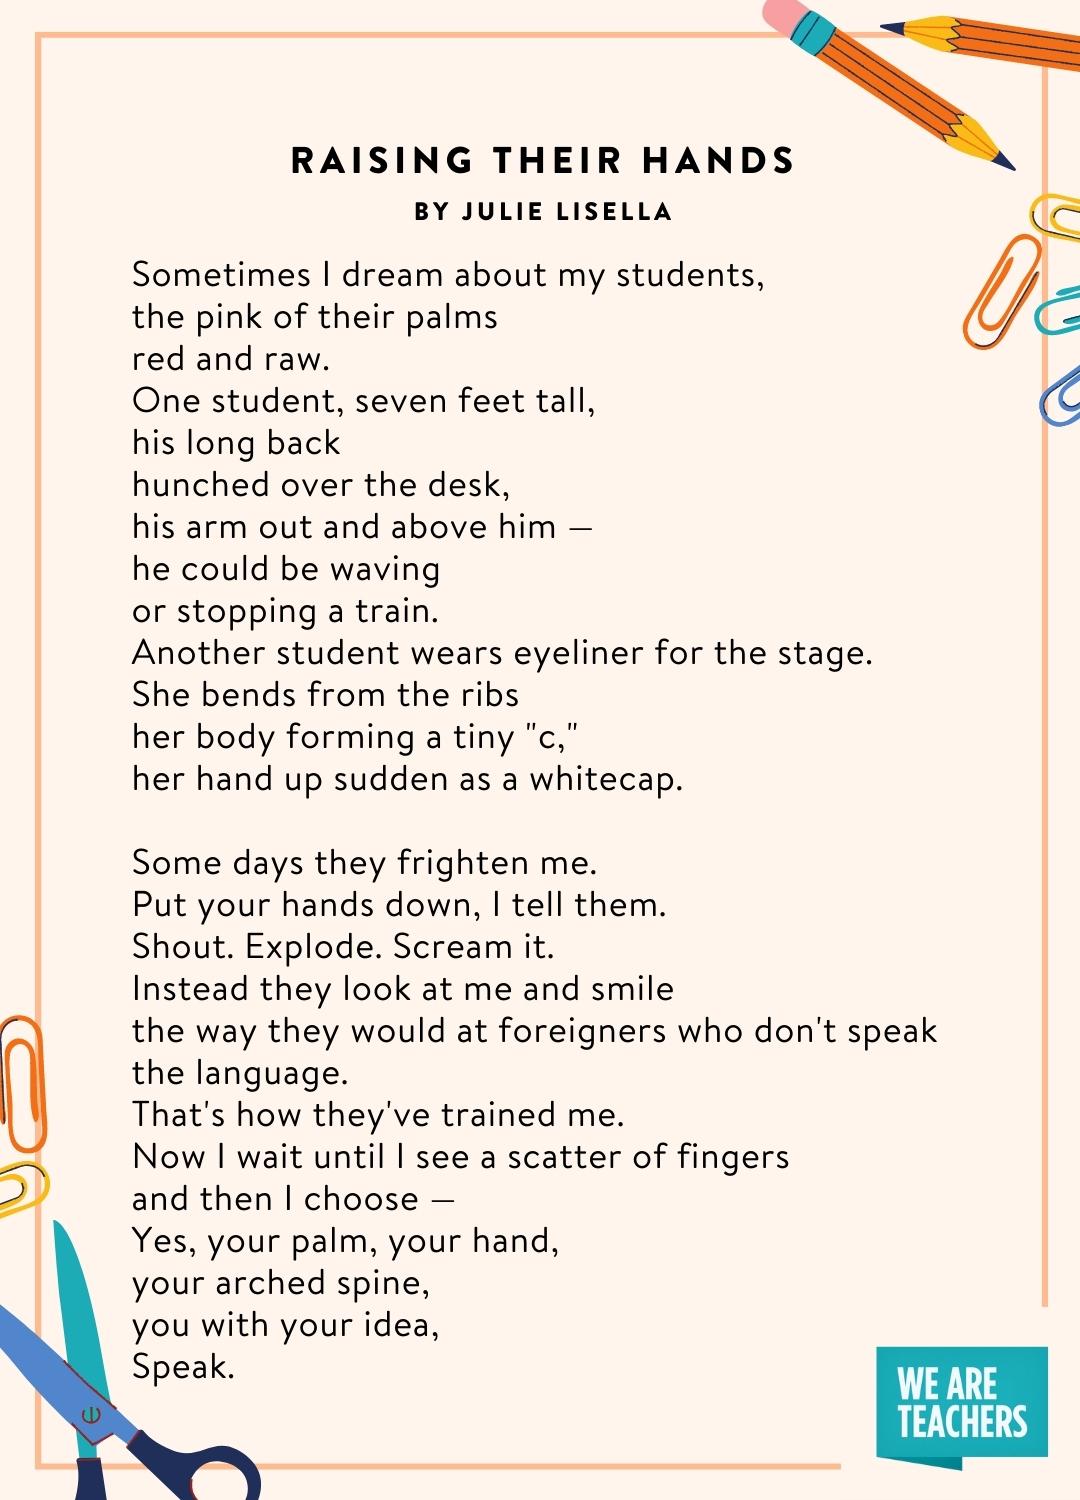 22 Best Poems About Teaching That Nail Classroom Life